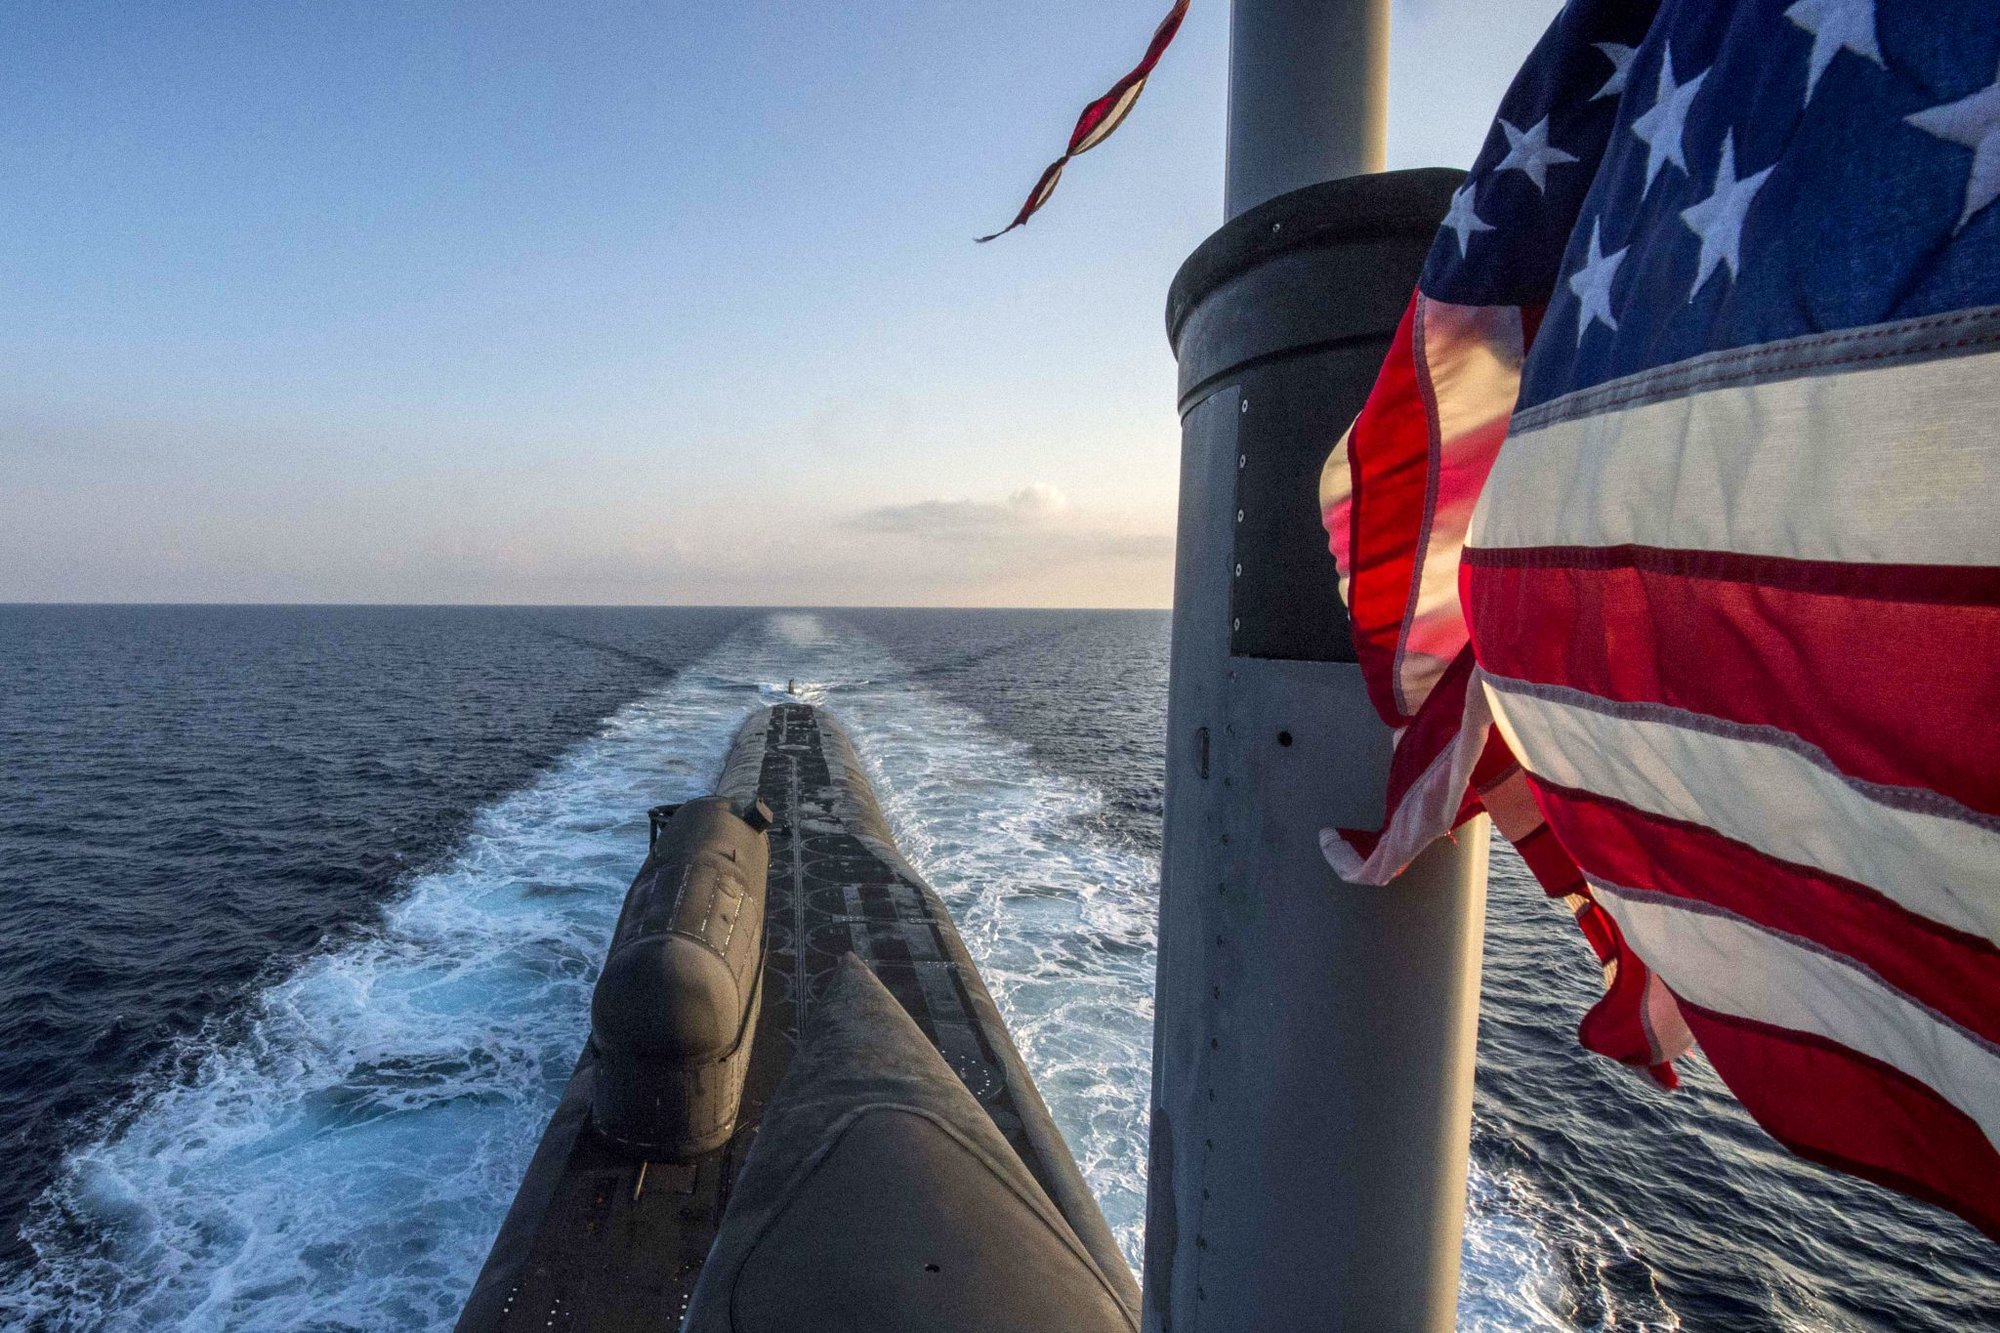 The guided-missile submarine USS Florida transits the Mediterranean Oct. 16, 2019. US Navy photo by Mass Communication Specialist 3rd Class Drew Verbis.